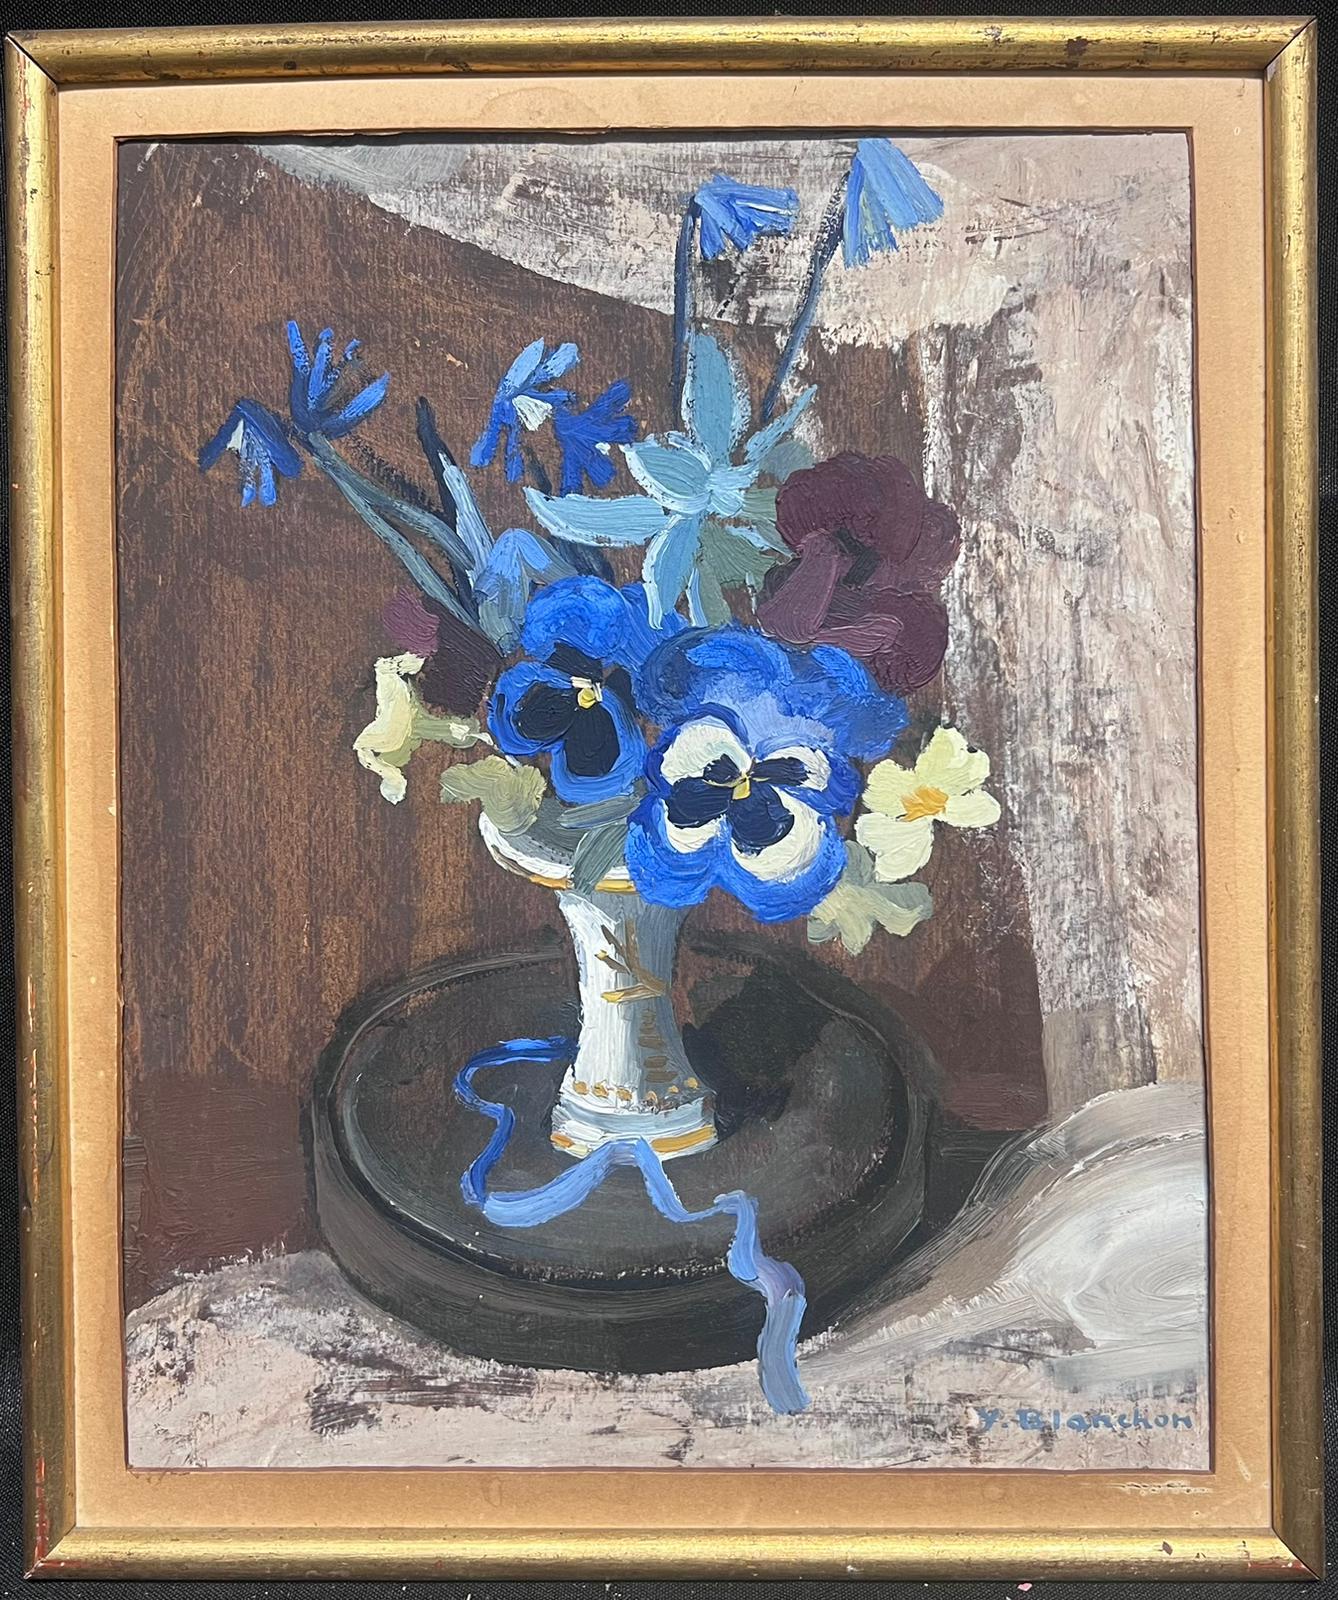 Blue Flowers
by Y. Blanchon, French 1950's Impressionist artist
signed oil on board, framed
board: 12.5 x 10.5 inches
framed: 11 x 9 inches
provenance: from a large private collection of this artists work in Northern France
condition: original, good